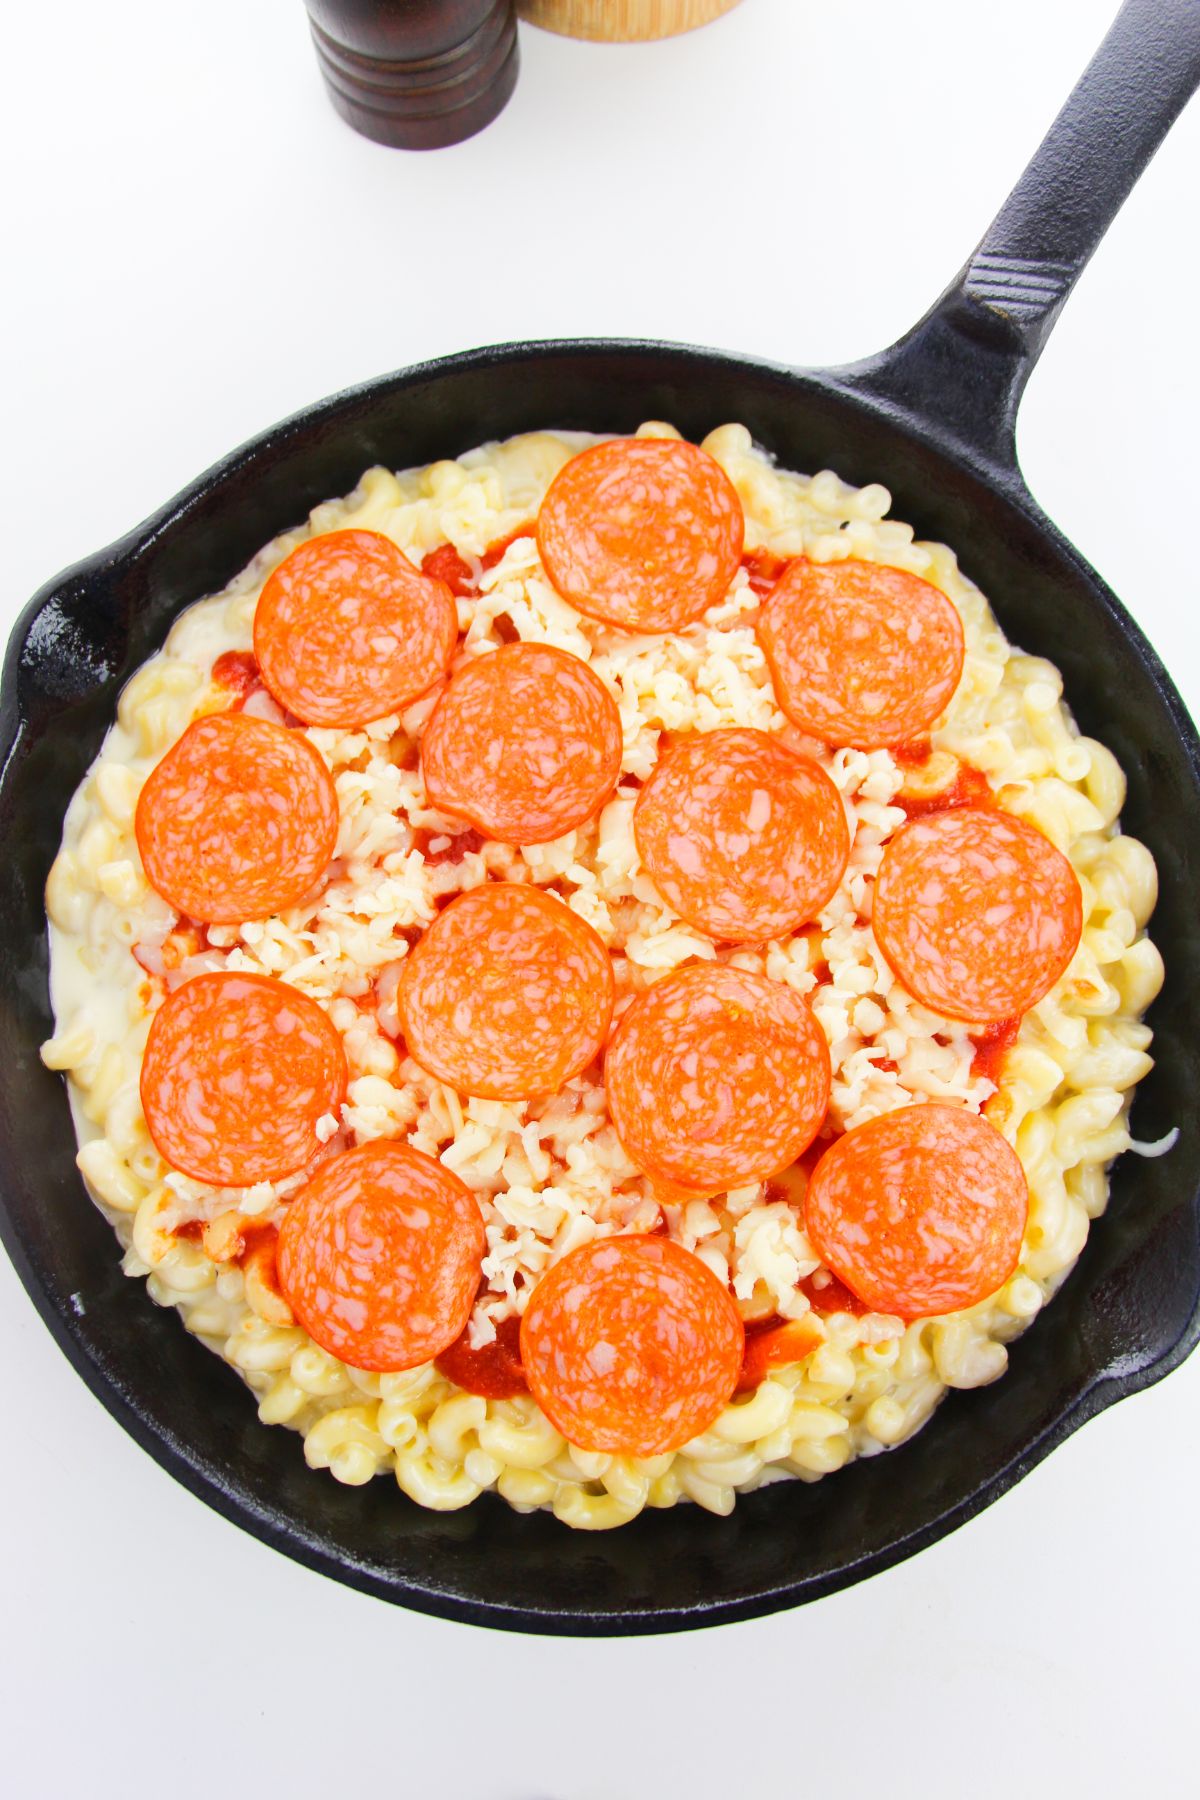 Macaroni, cheese mixture and pepperoni in a skillet.